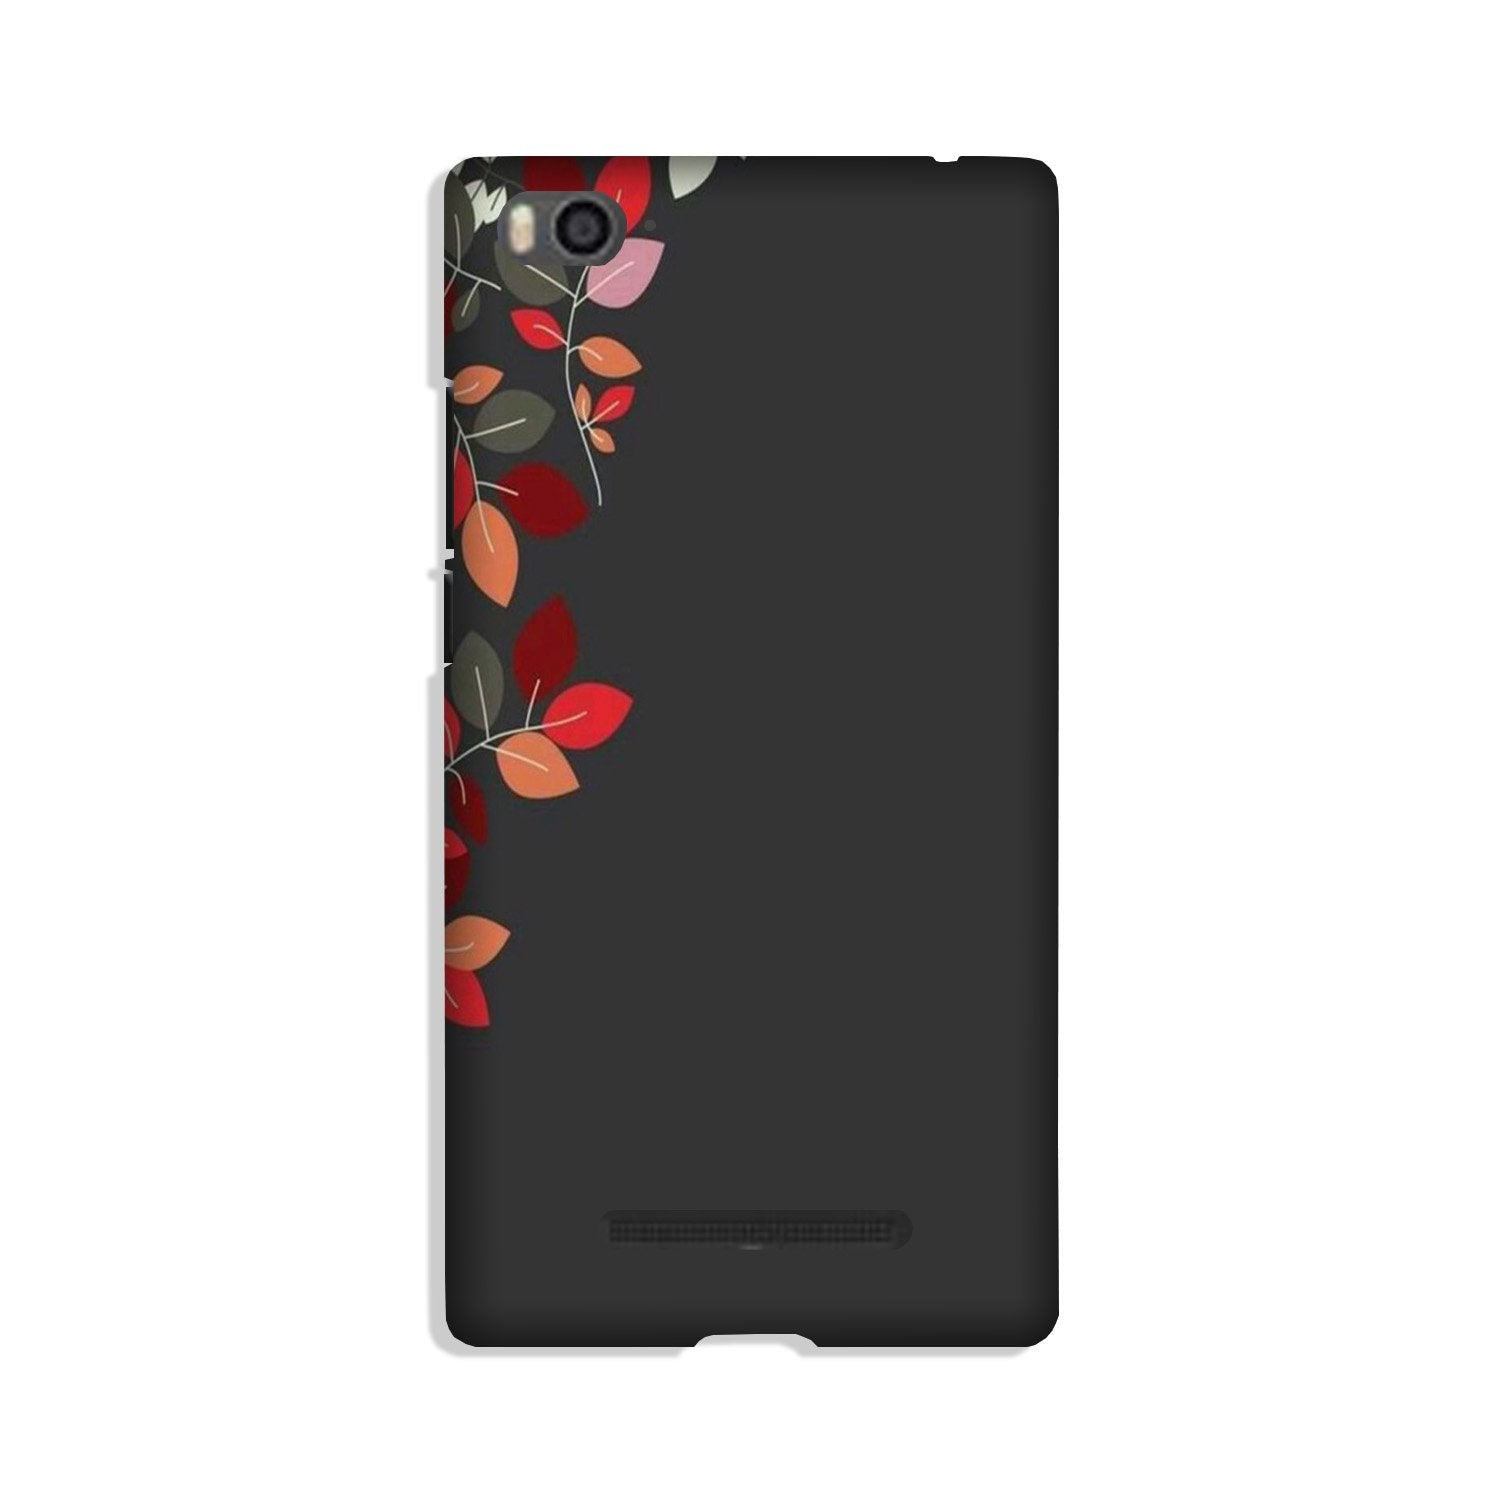 Grey Background Case for Redmi 4A